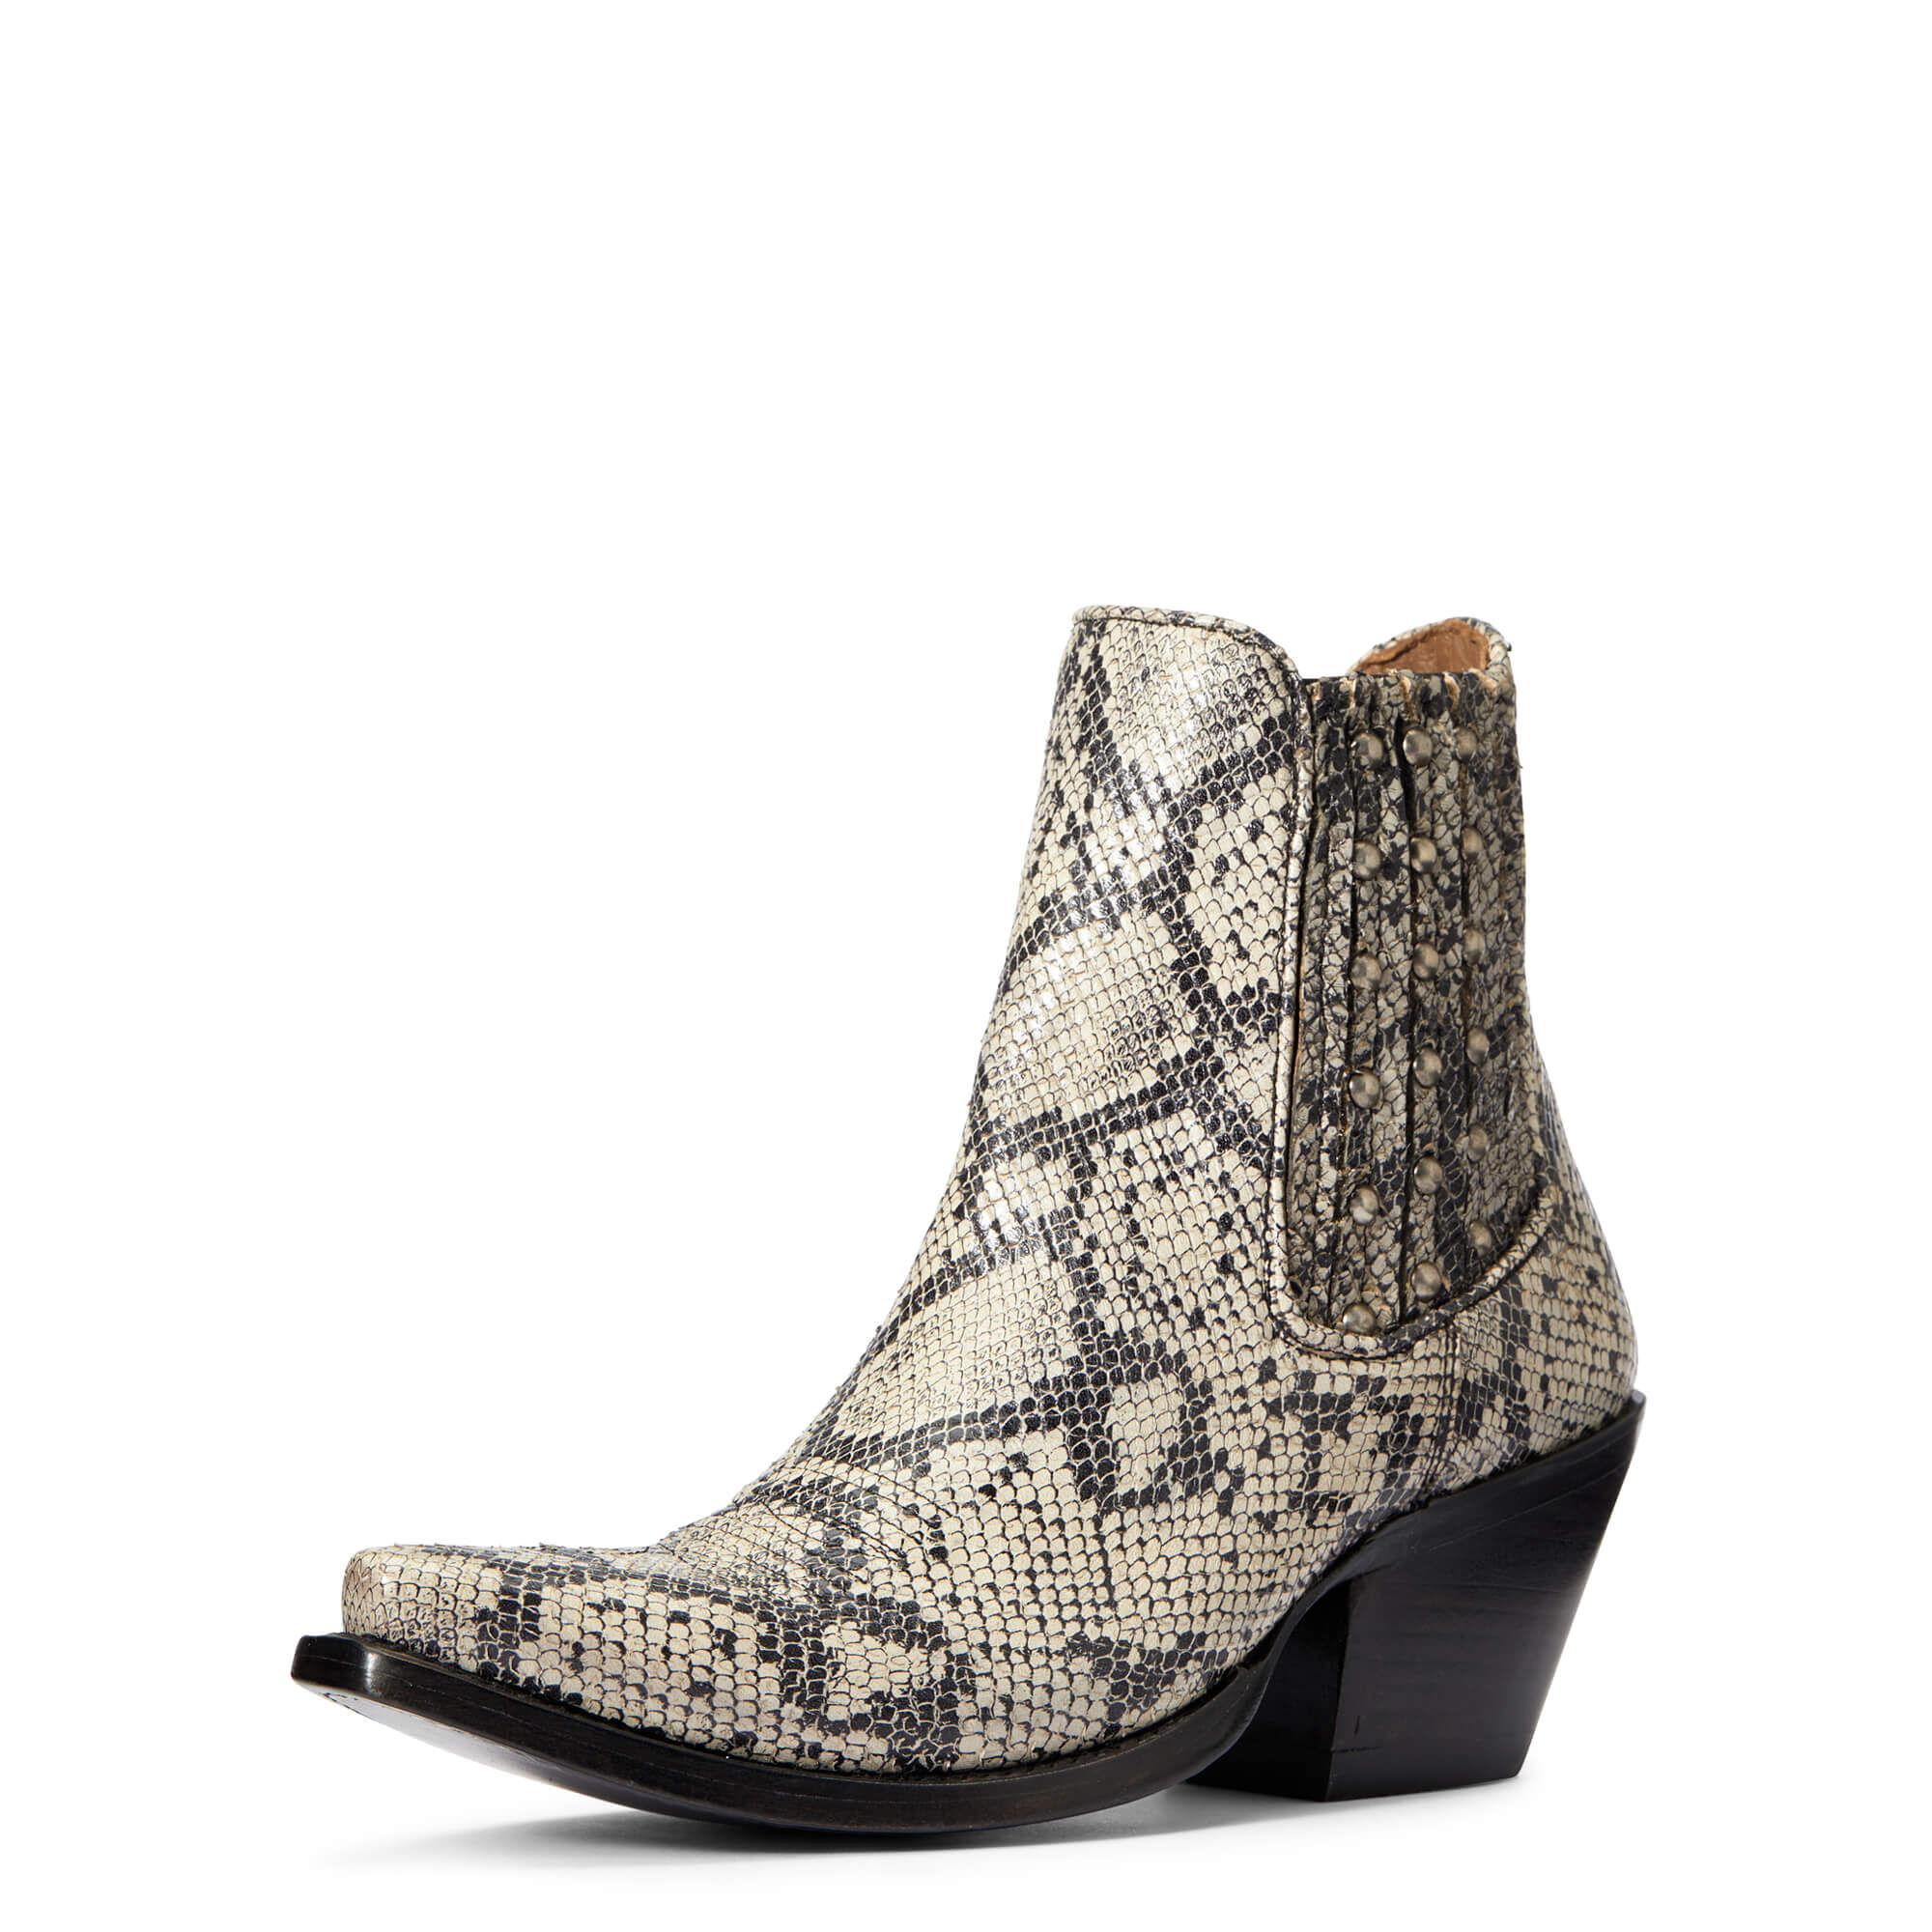 Women's Eclipse Western Boots in Black White Snake Leather  by Ariat